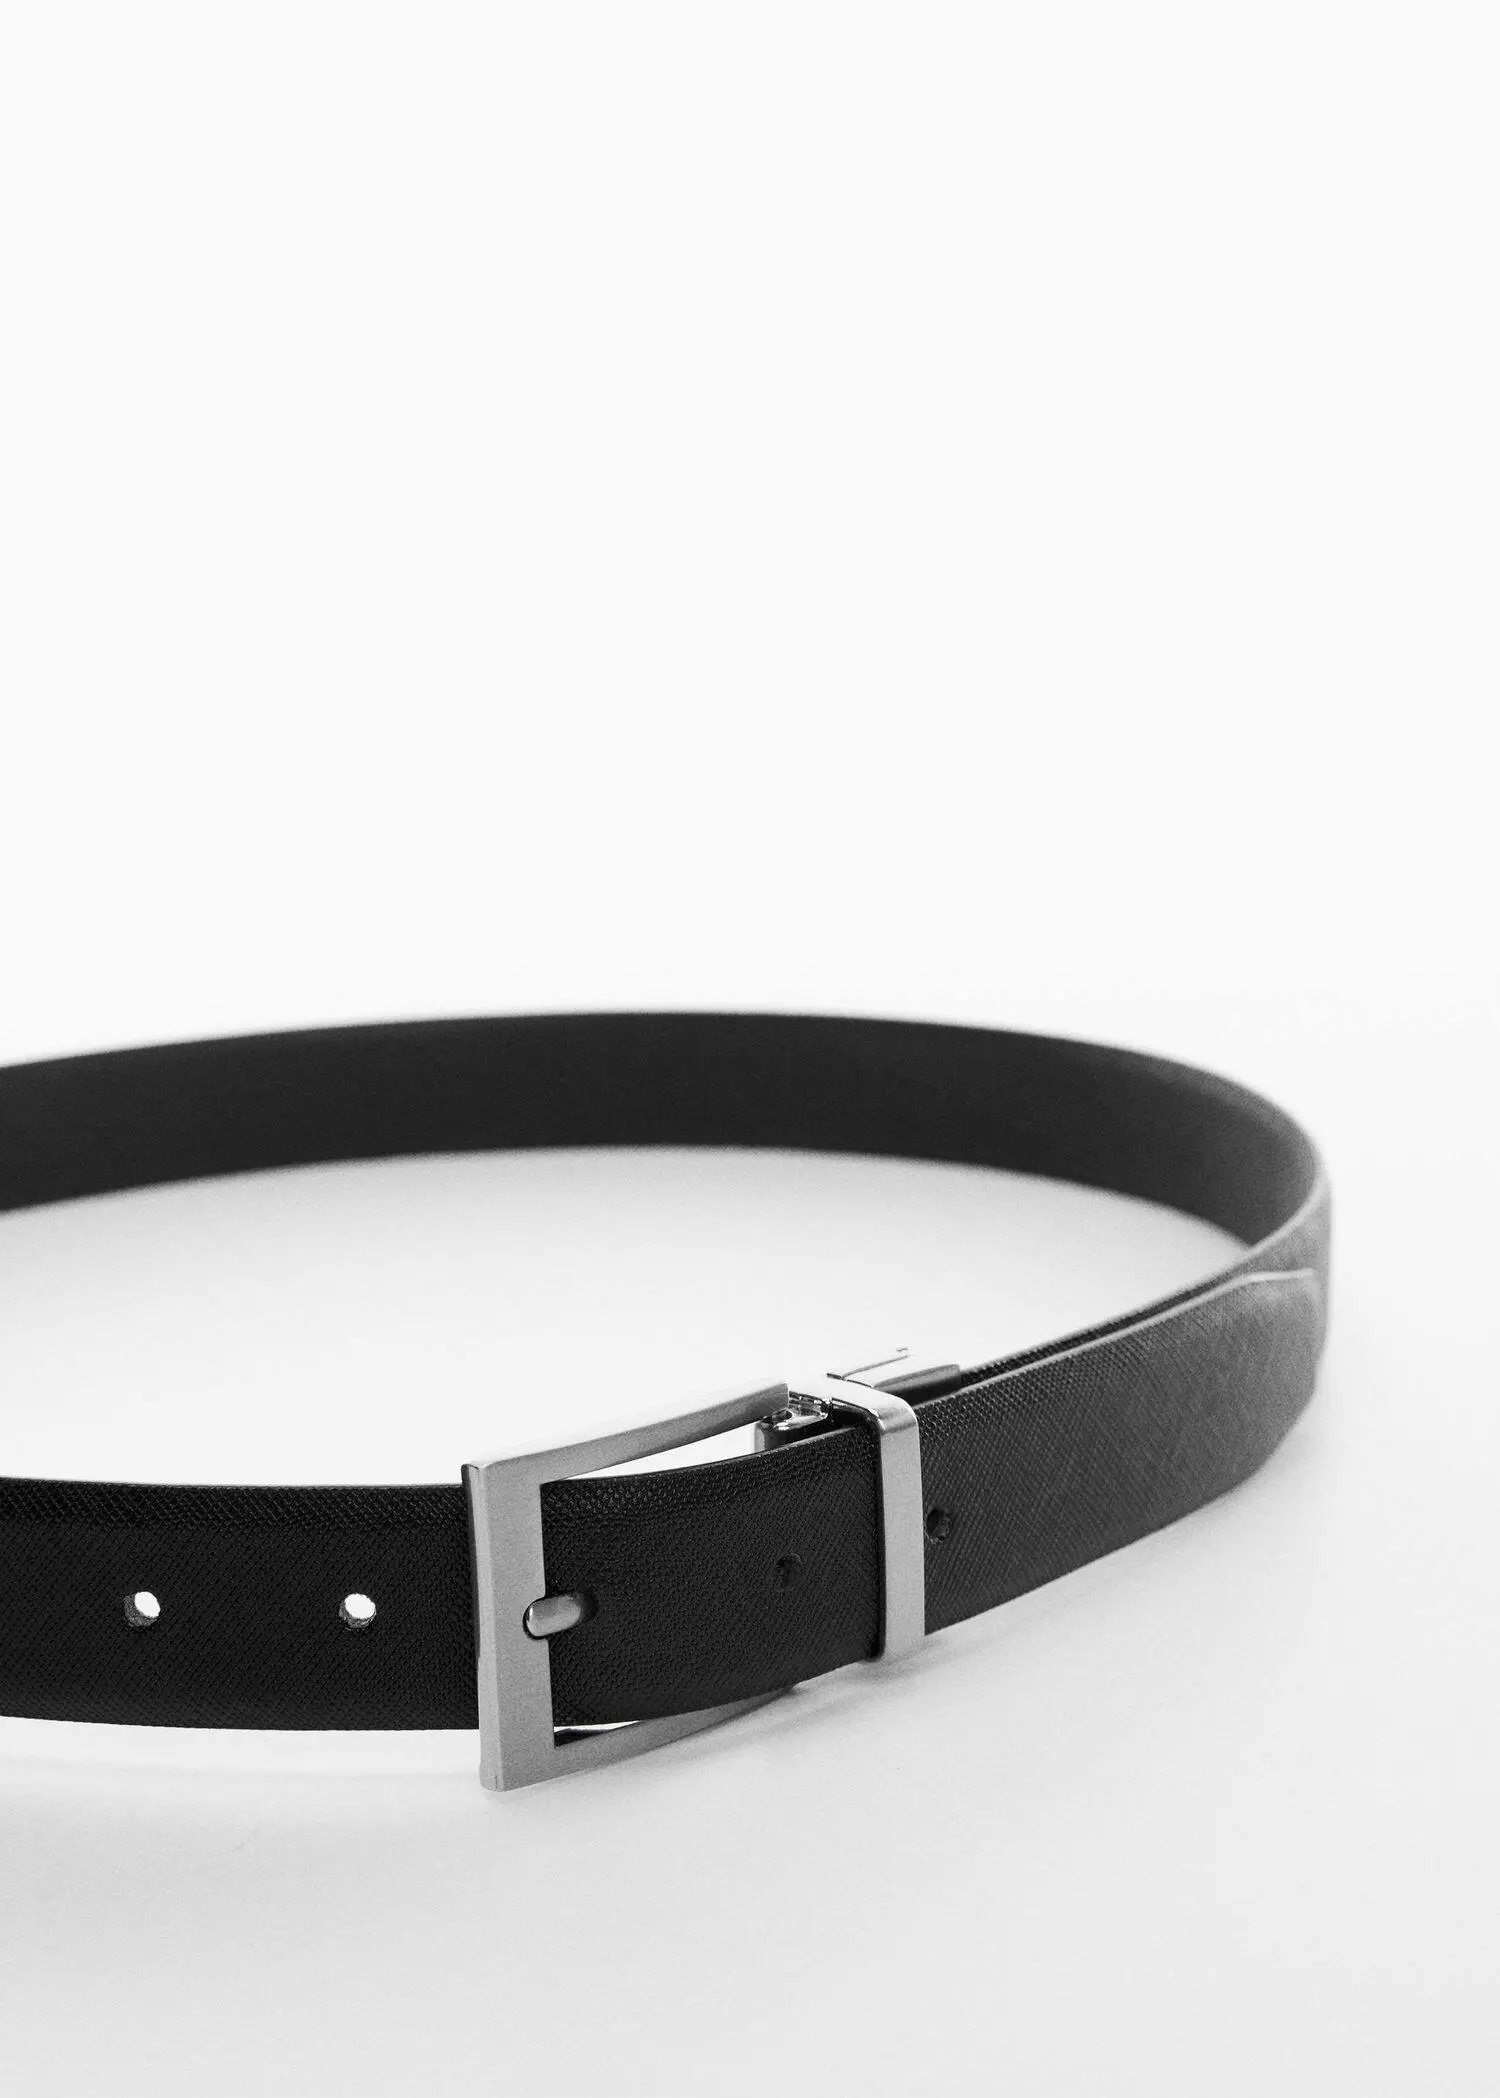 Mango Saffiano leather tailored belt. a close-up of a black leather belt with a silver buckle. 